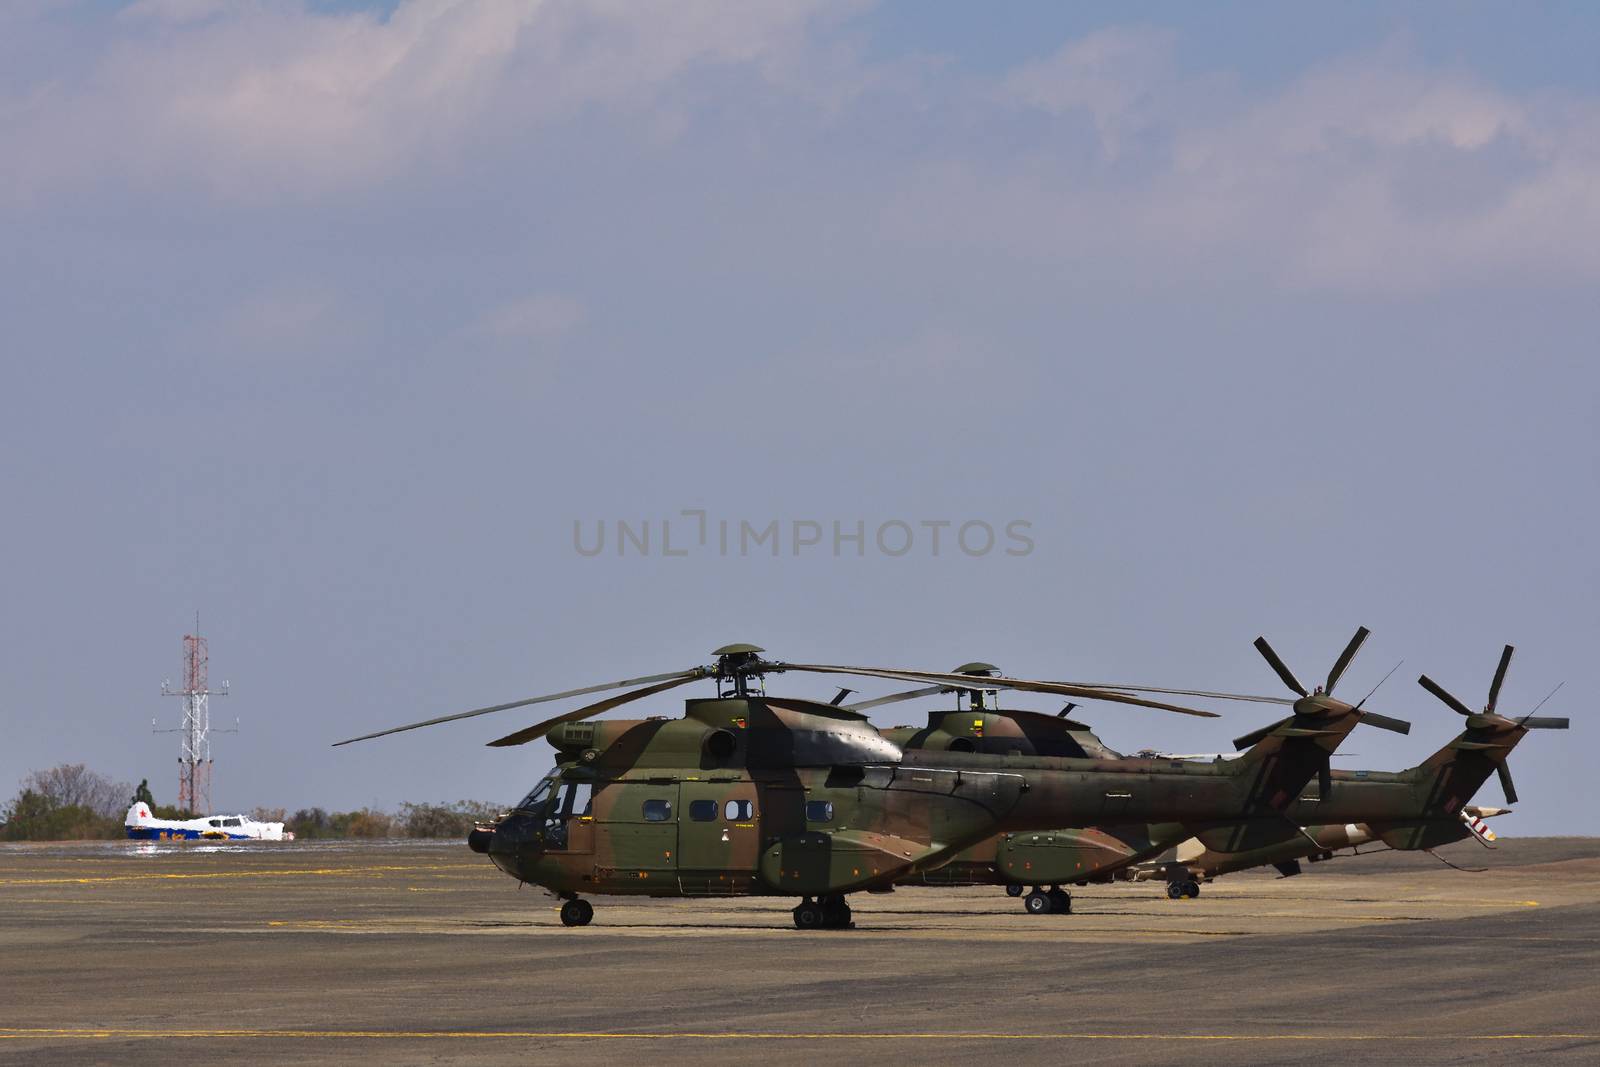 A Pair of military atlas oryx helicopters parked on an airfield, Pretoria, South Africa